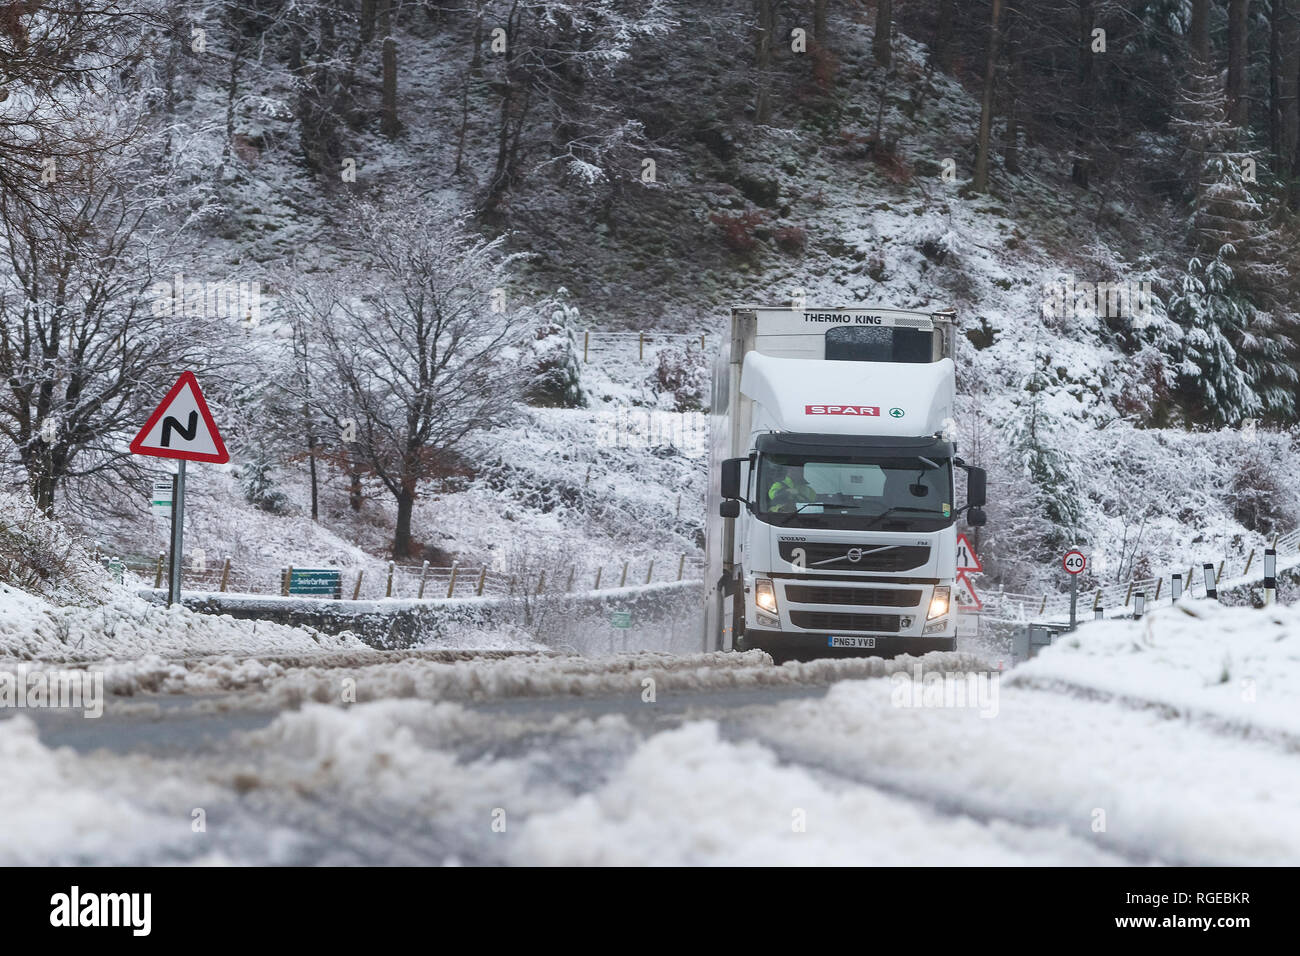 Thirlmere, Keswick, Cumbria. 29th Jan 2019. UK Weather: A HGV lorry battles the bad road conditions on the A591 between Keswick and Ambleside, during snowy conditions at Thirlmere, Keswick, Cumbria, UK. 29th January 2019. Photograph by Richard Holmes. Credit: Richard Holmes/Alamy Live News Stock Photo